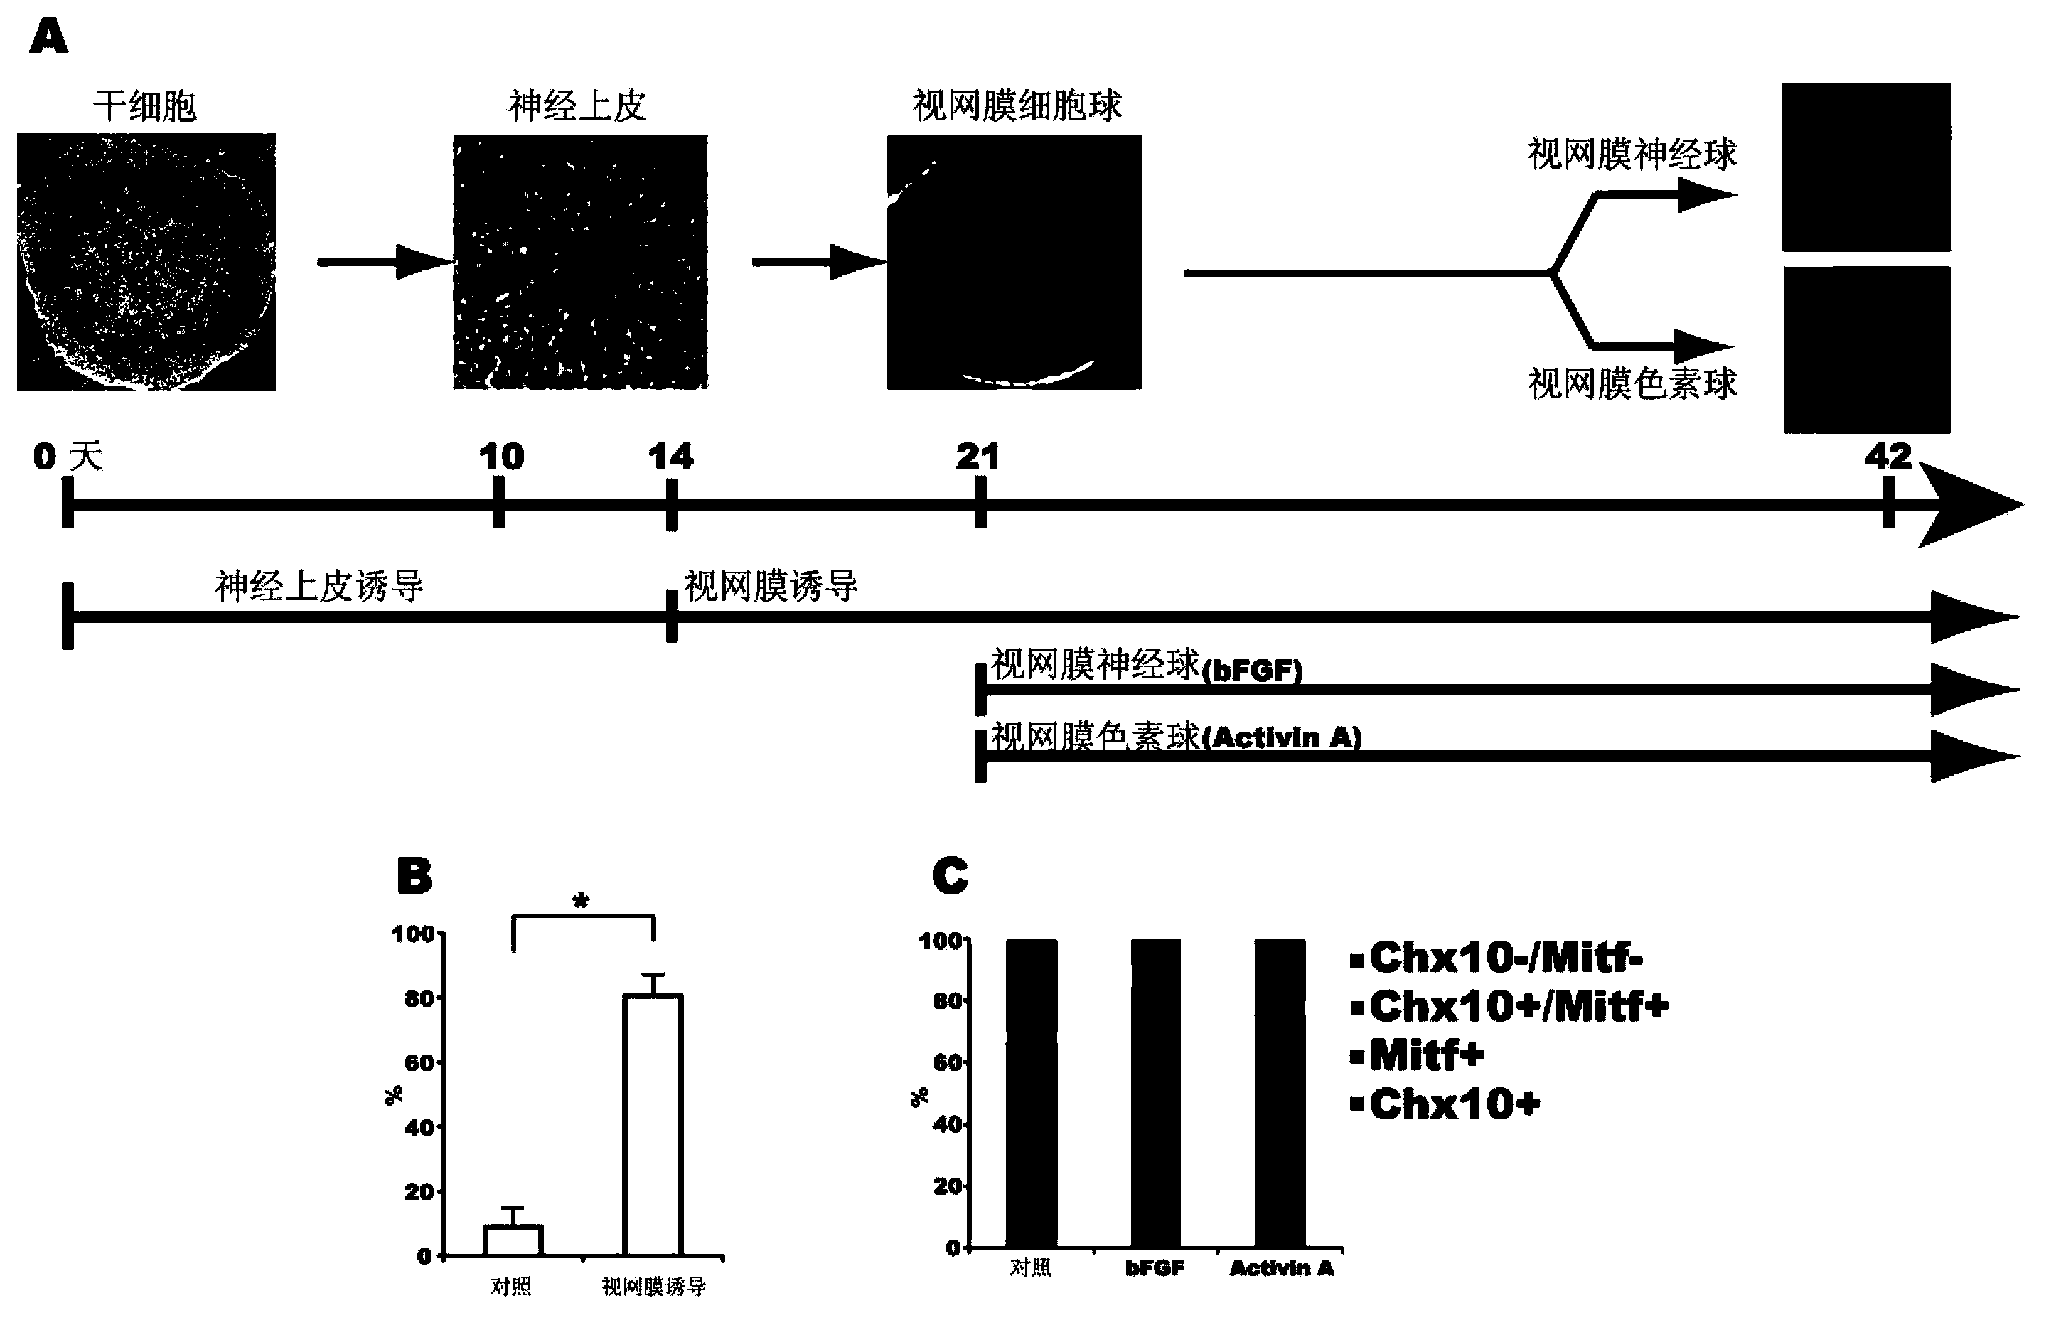 Method used for inducing differentiation of human multipotential stem cells into retinal progenitor cells